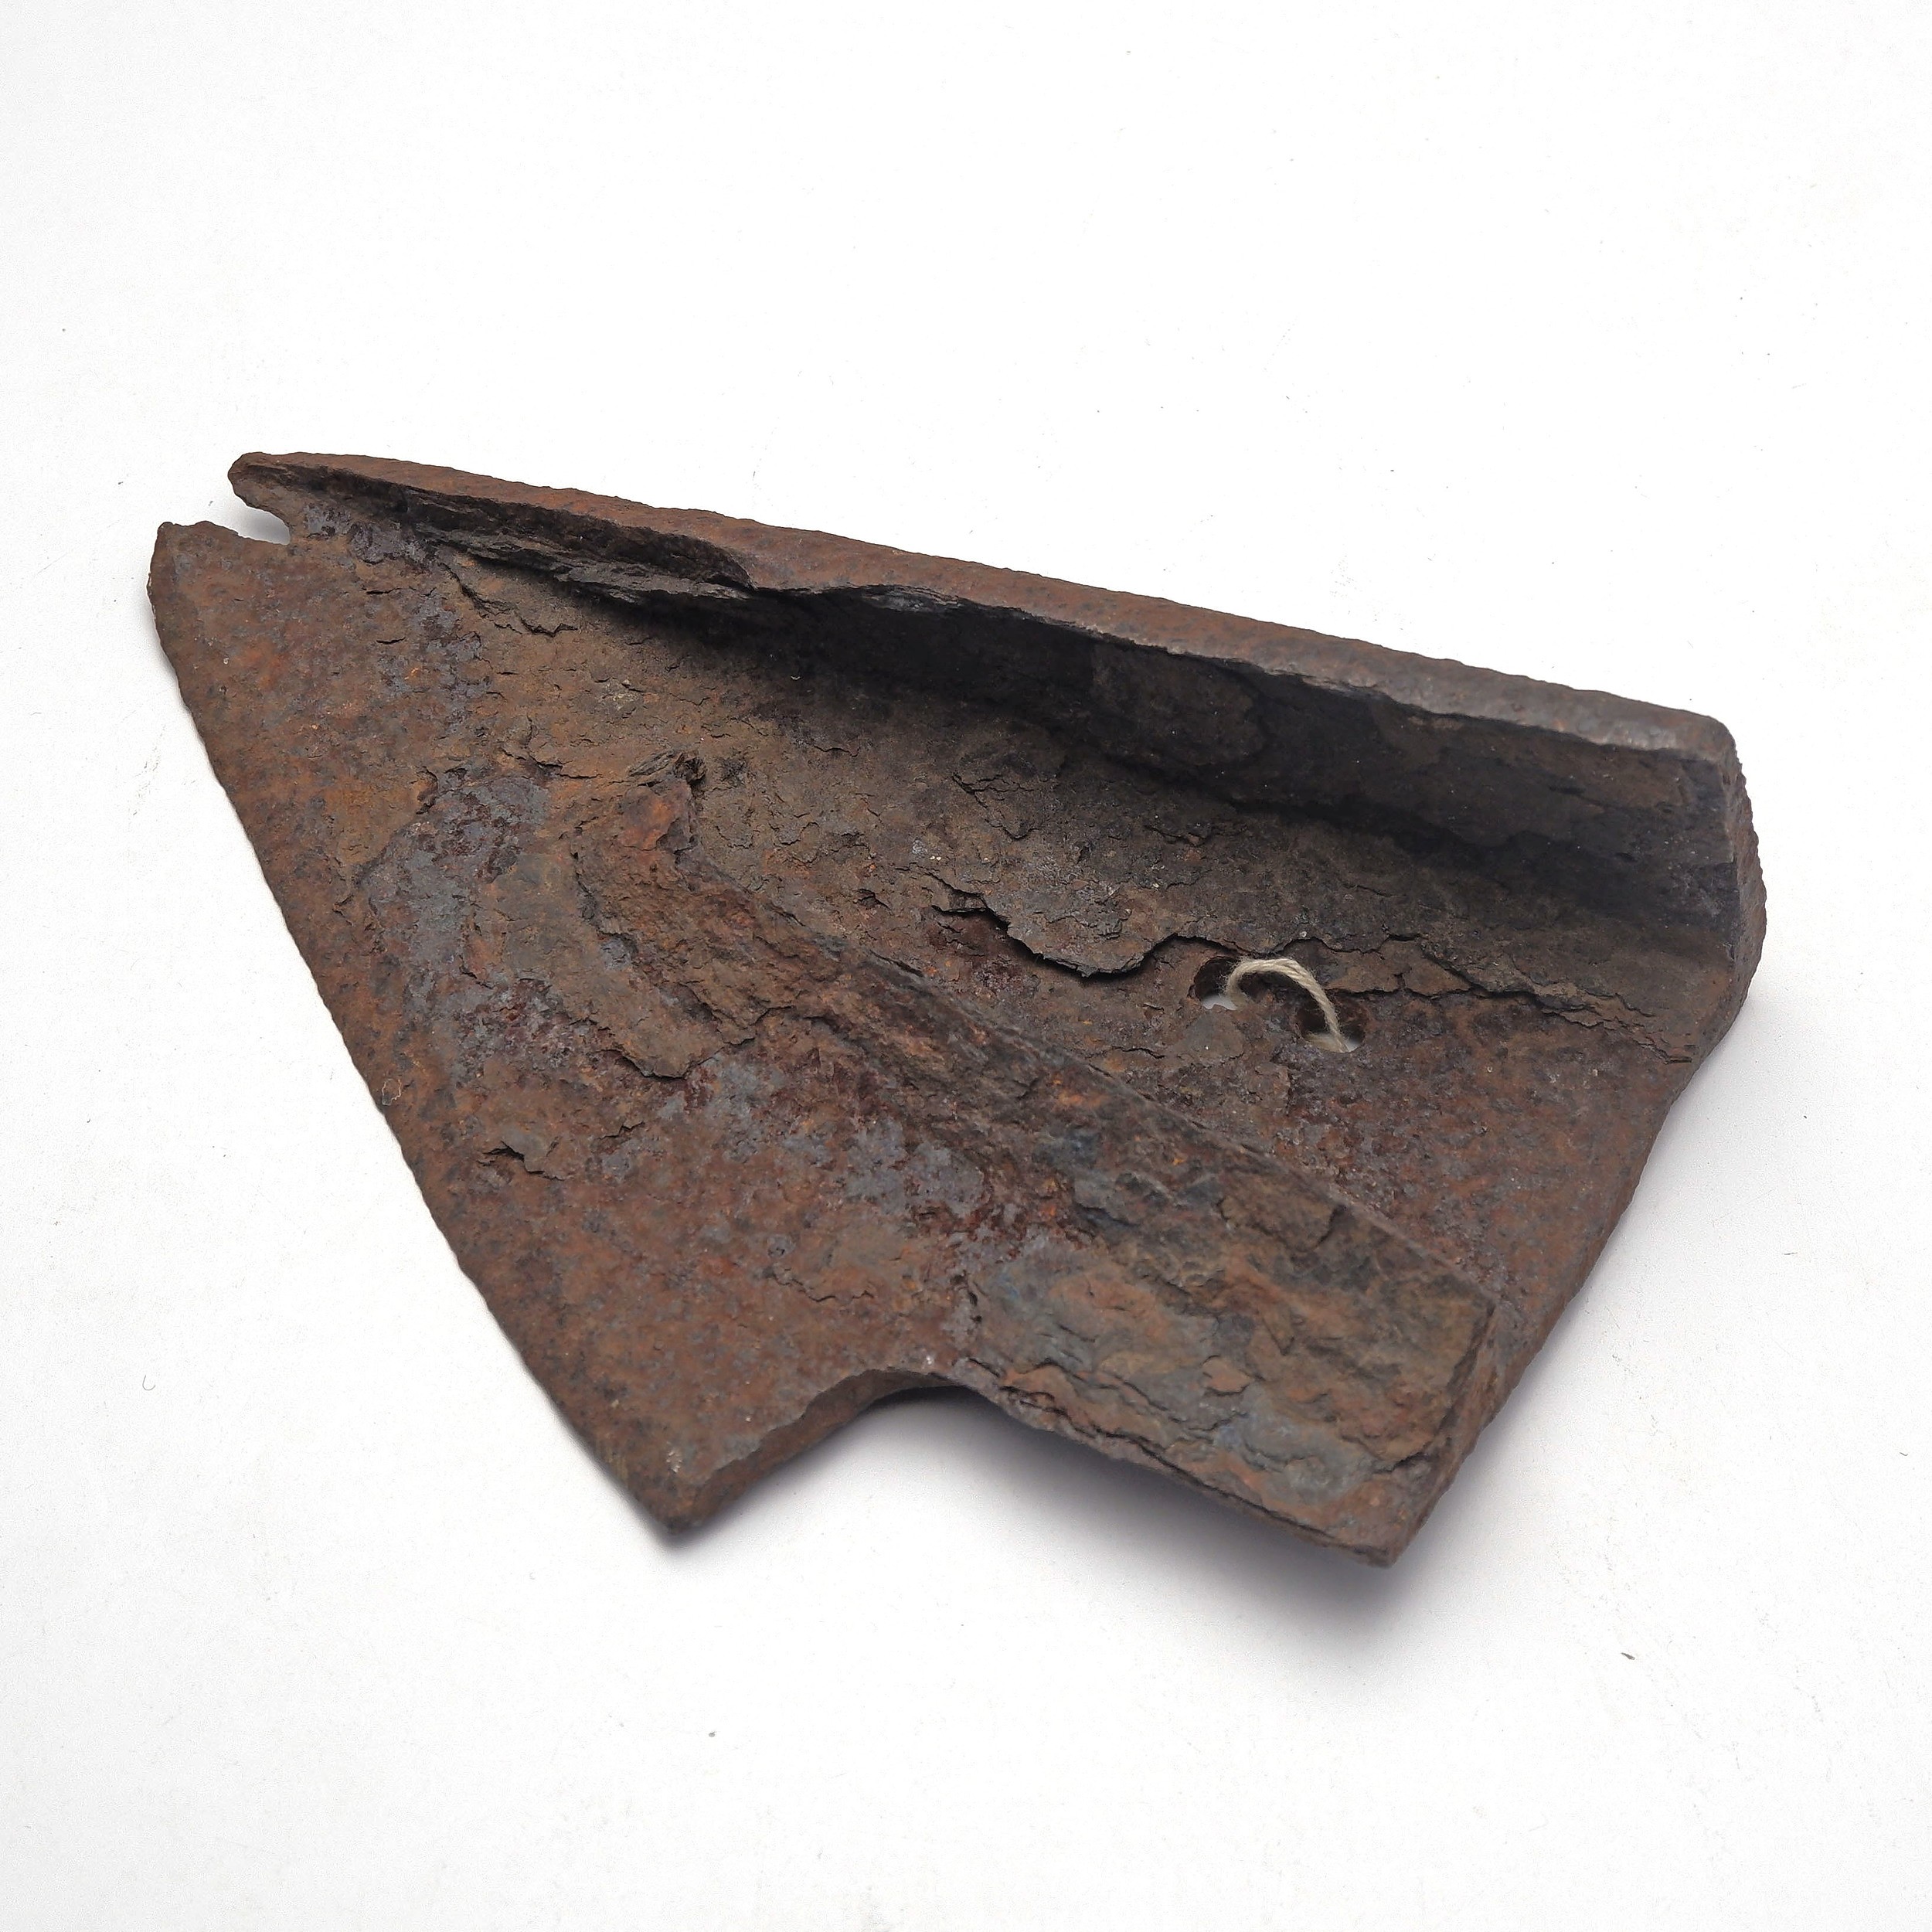 'Cast Iron Share from Edward Hentys First Plough, From the William Poland Collection (Hentys Manager)'